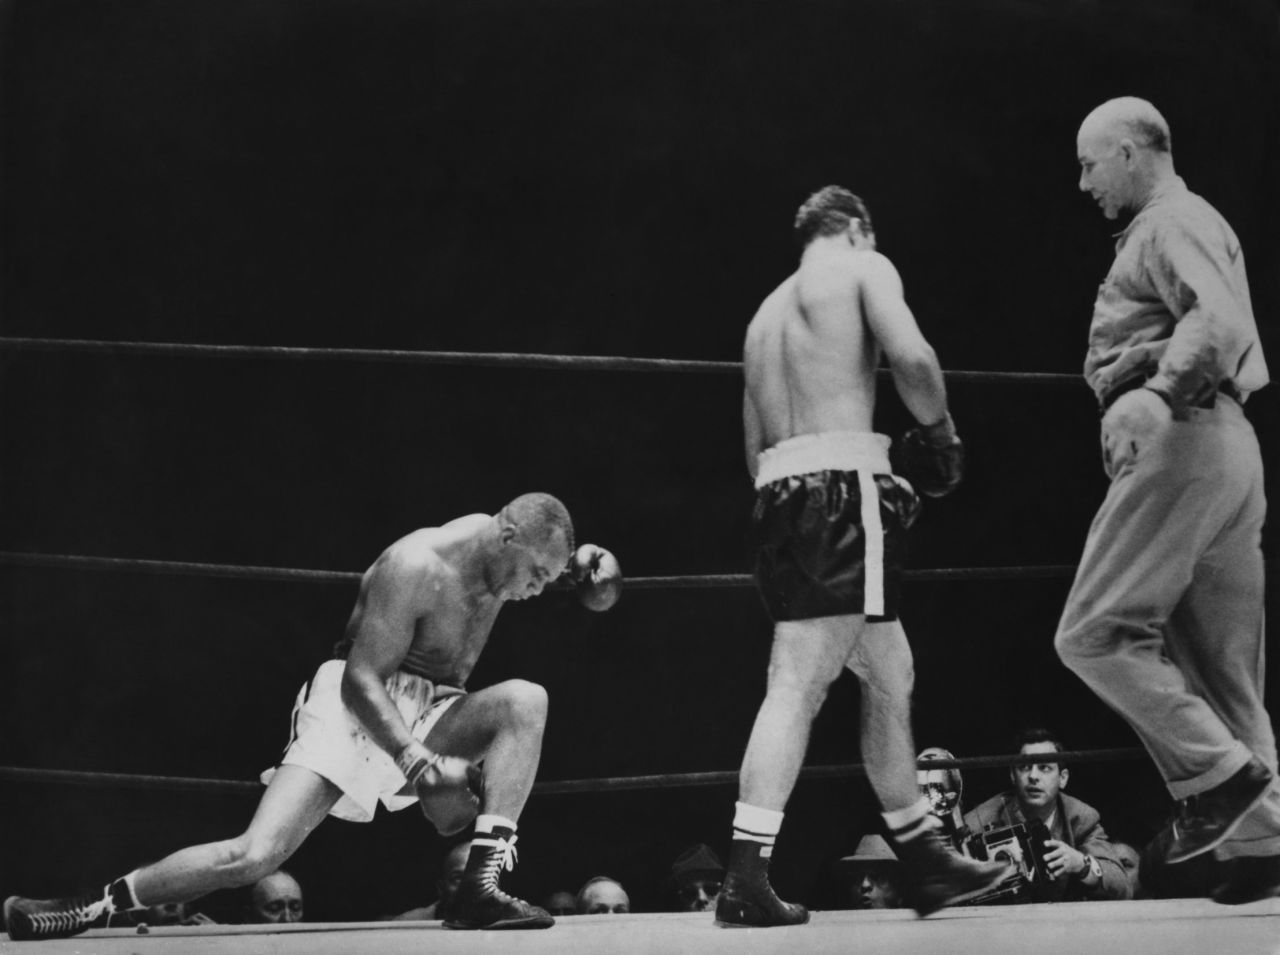 Sometimes it takes just one person to etch a place in the pantheon of great sporting comebacks. In 1952 American boxer Rocky Marciano (center) had been knocked down in the first round and was losing on all the judges' scorecards before he landed his own knockout blow in the 13th round to defeat Jersey Joe Walcott  (left) and become the heavyweight boxing champion of the world.